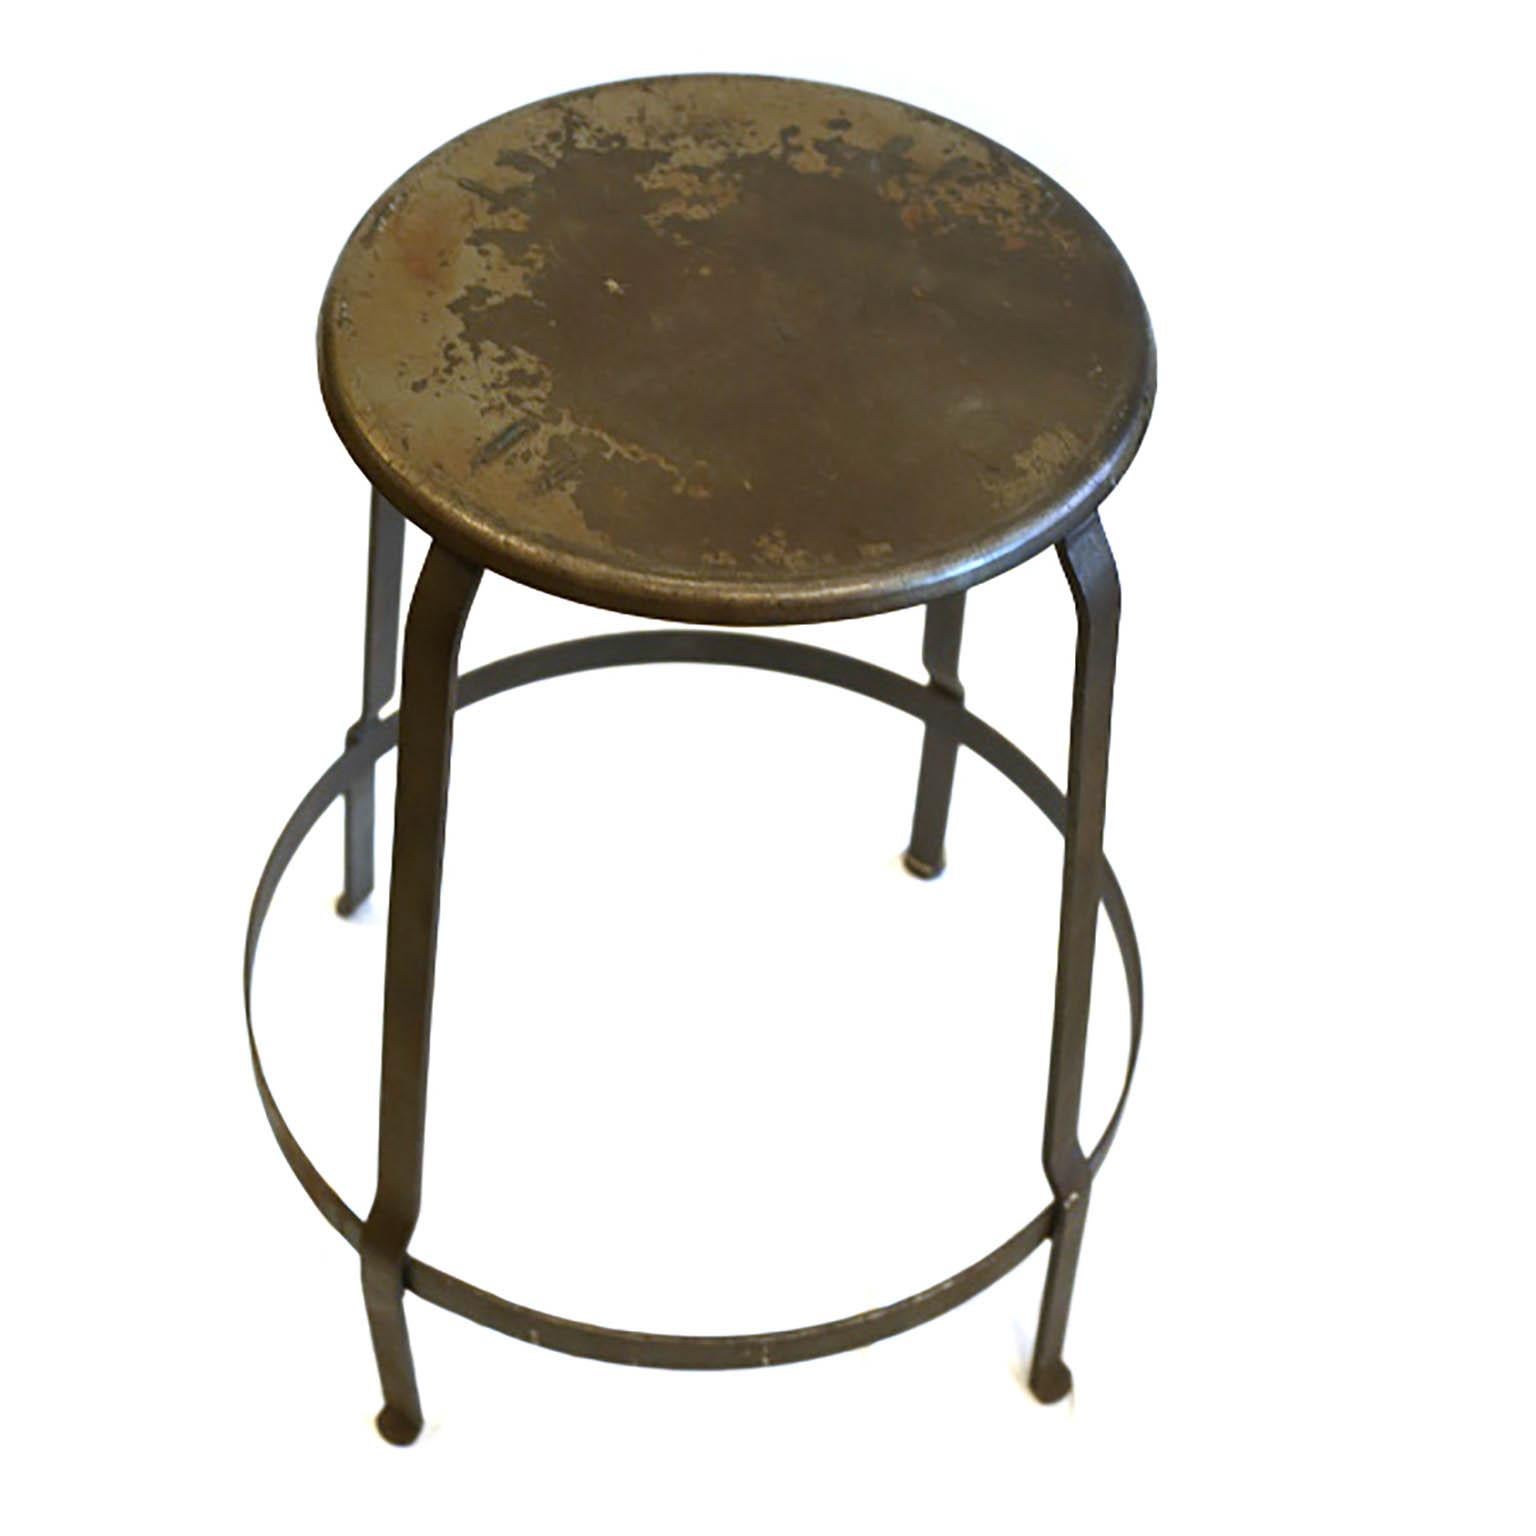 Round steel industrial stool, circa 1930-1940s. Possibly from a factory or machine shop.